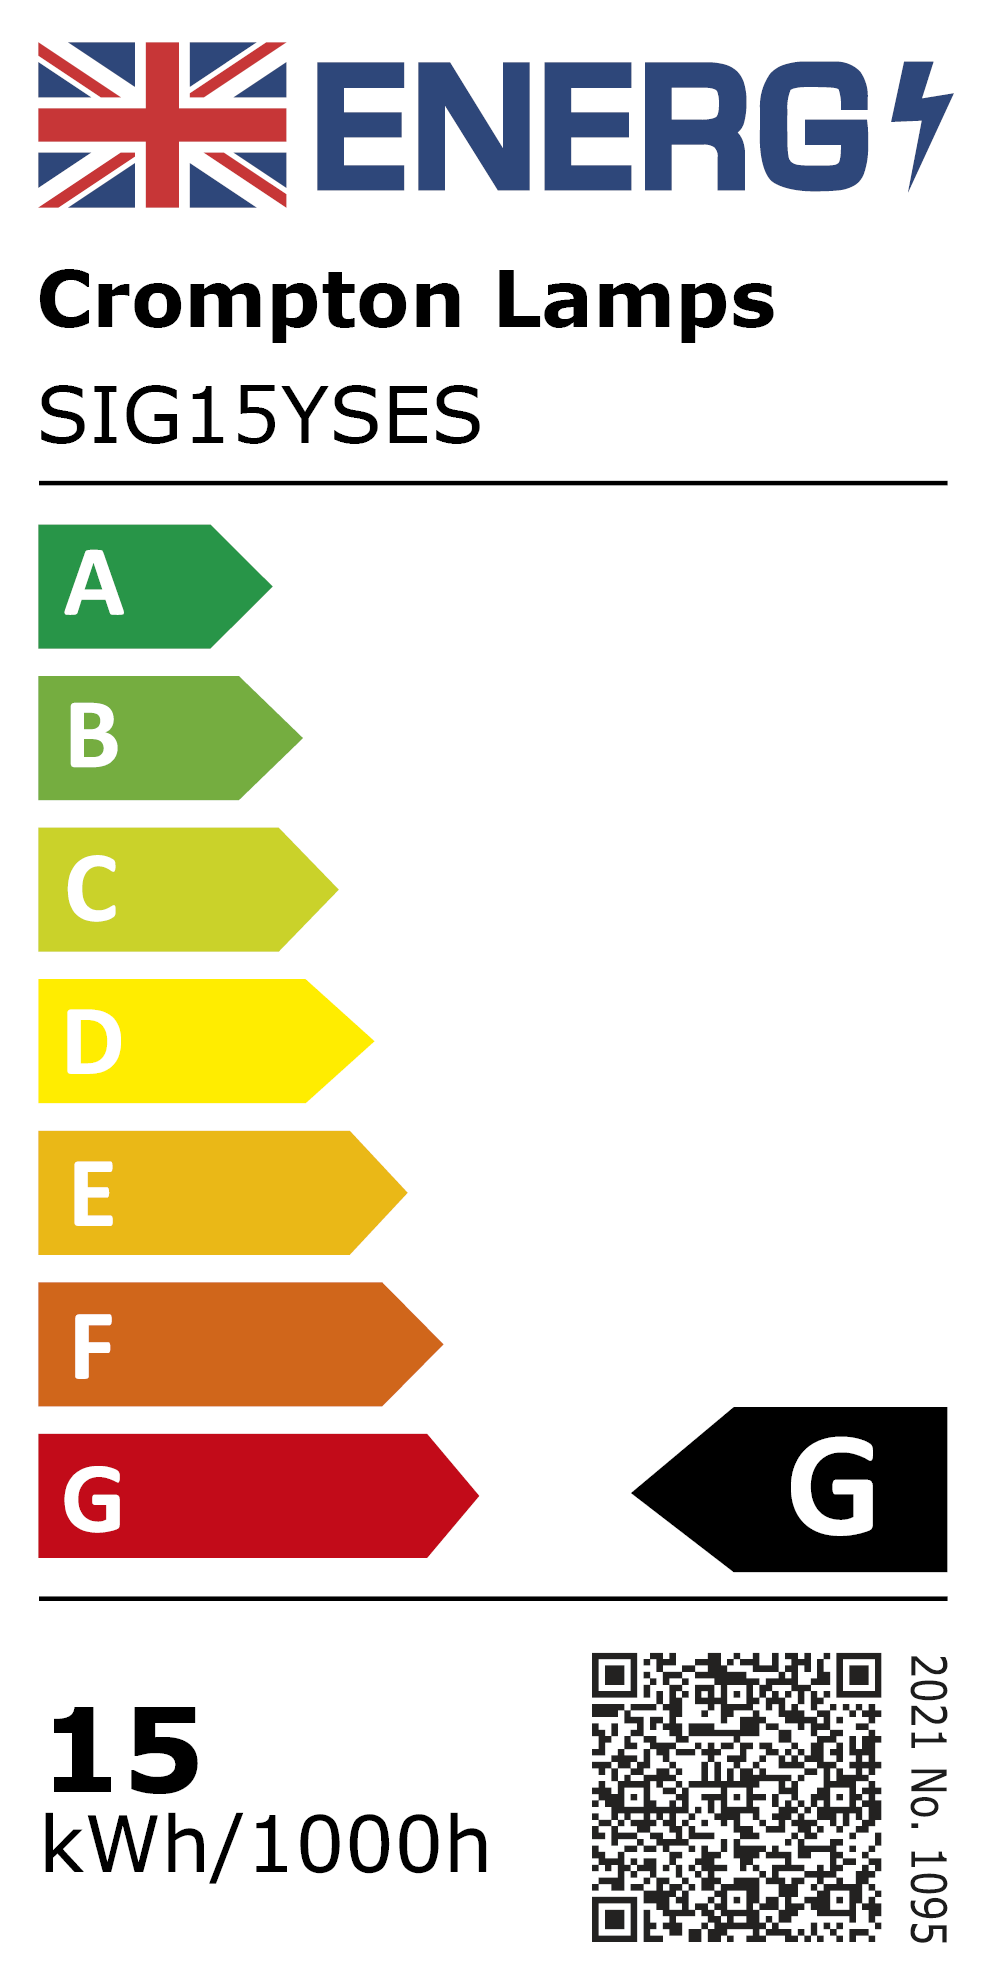 New 2021 Energy Rating Label: Stock Code SIG15YSES